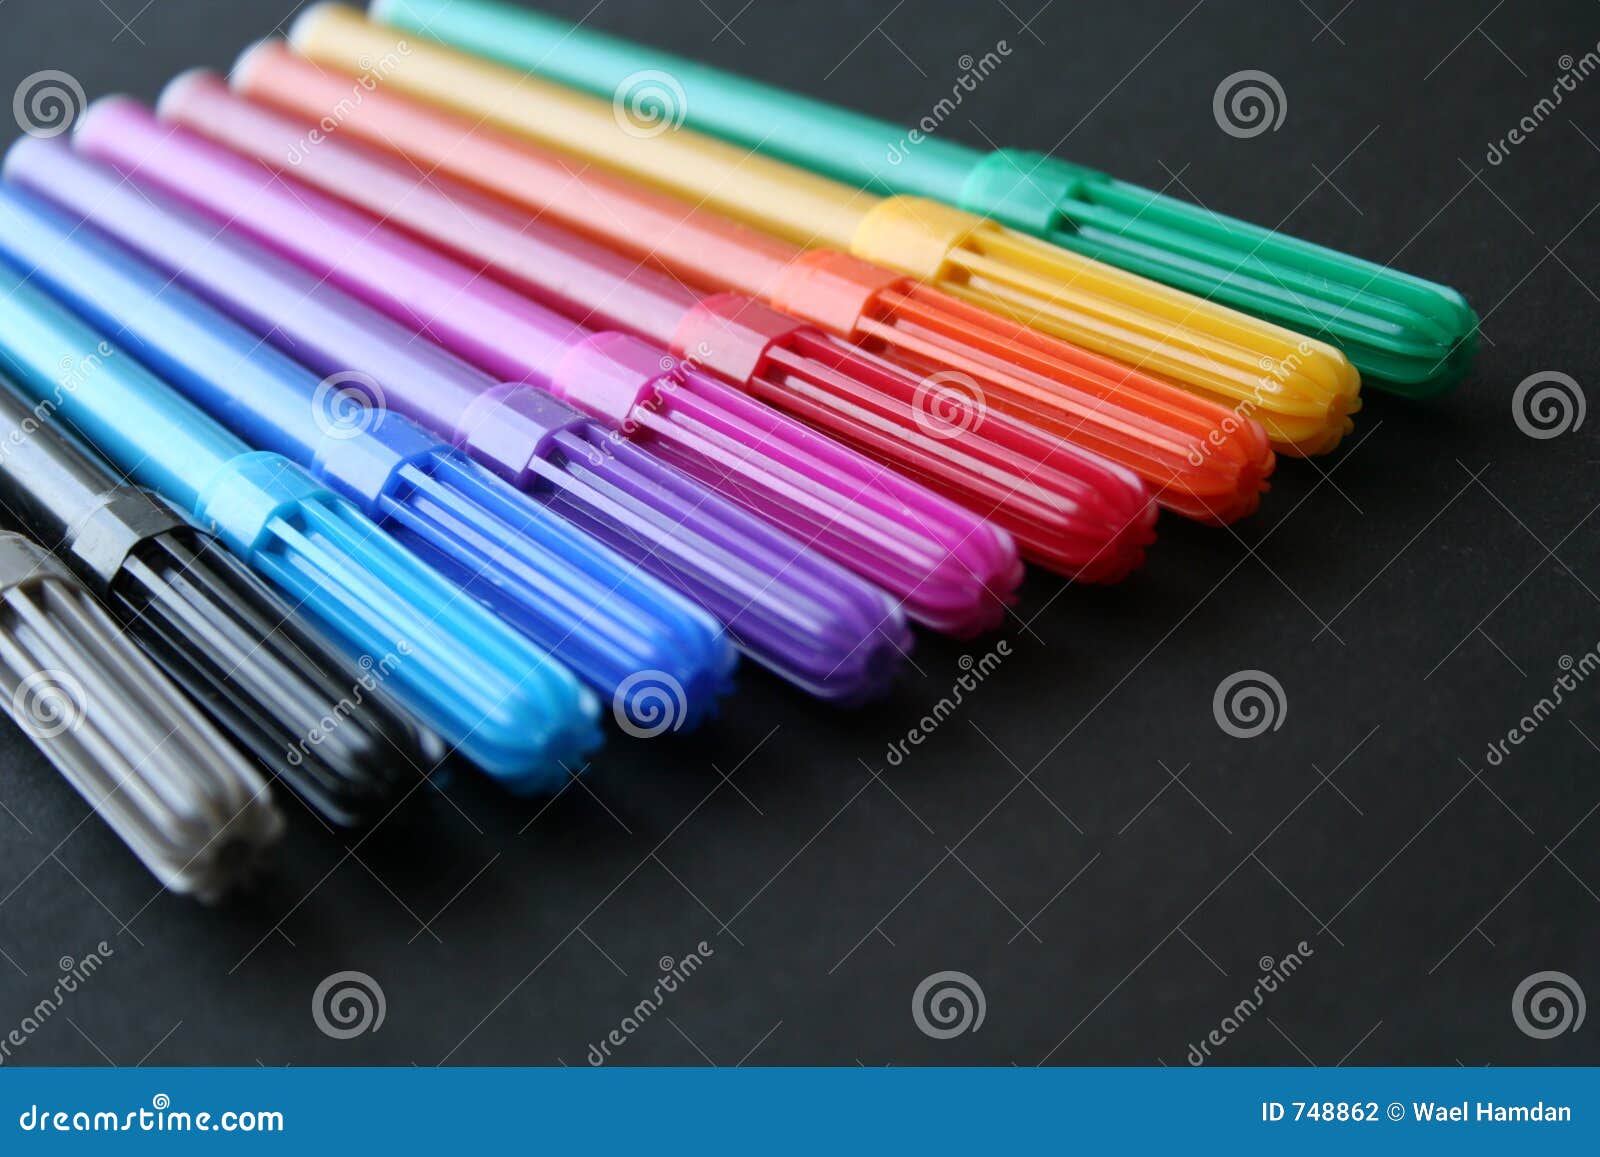 https://thumbs.dreamstime.com/z/colored-markers-set-748862.jpg